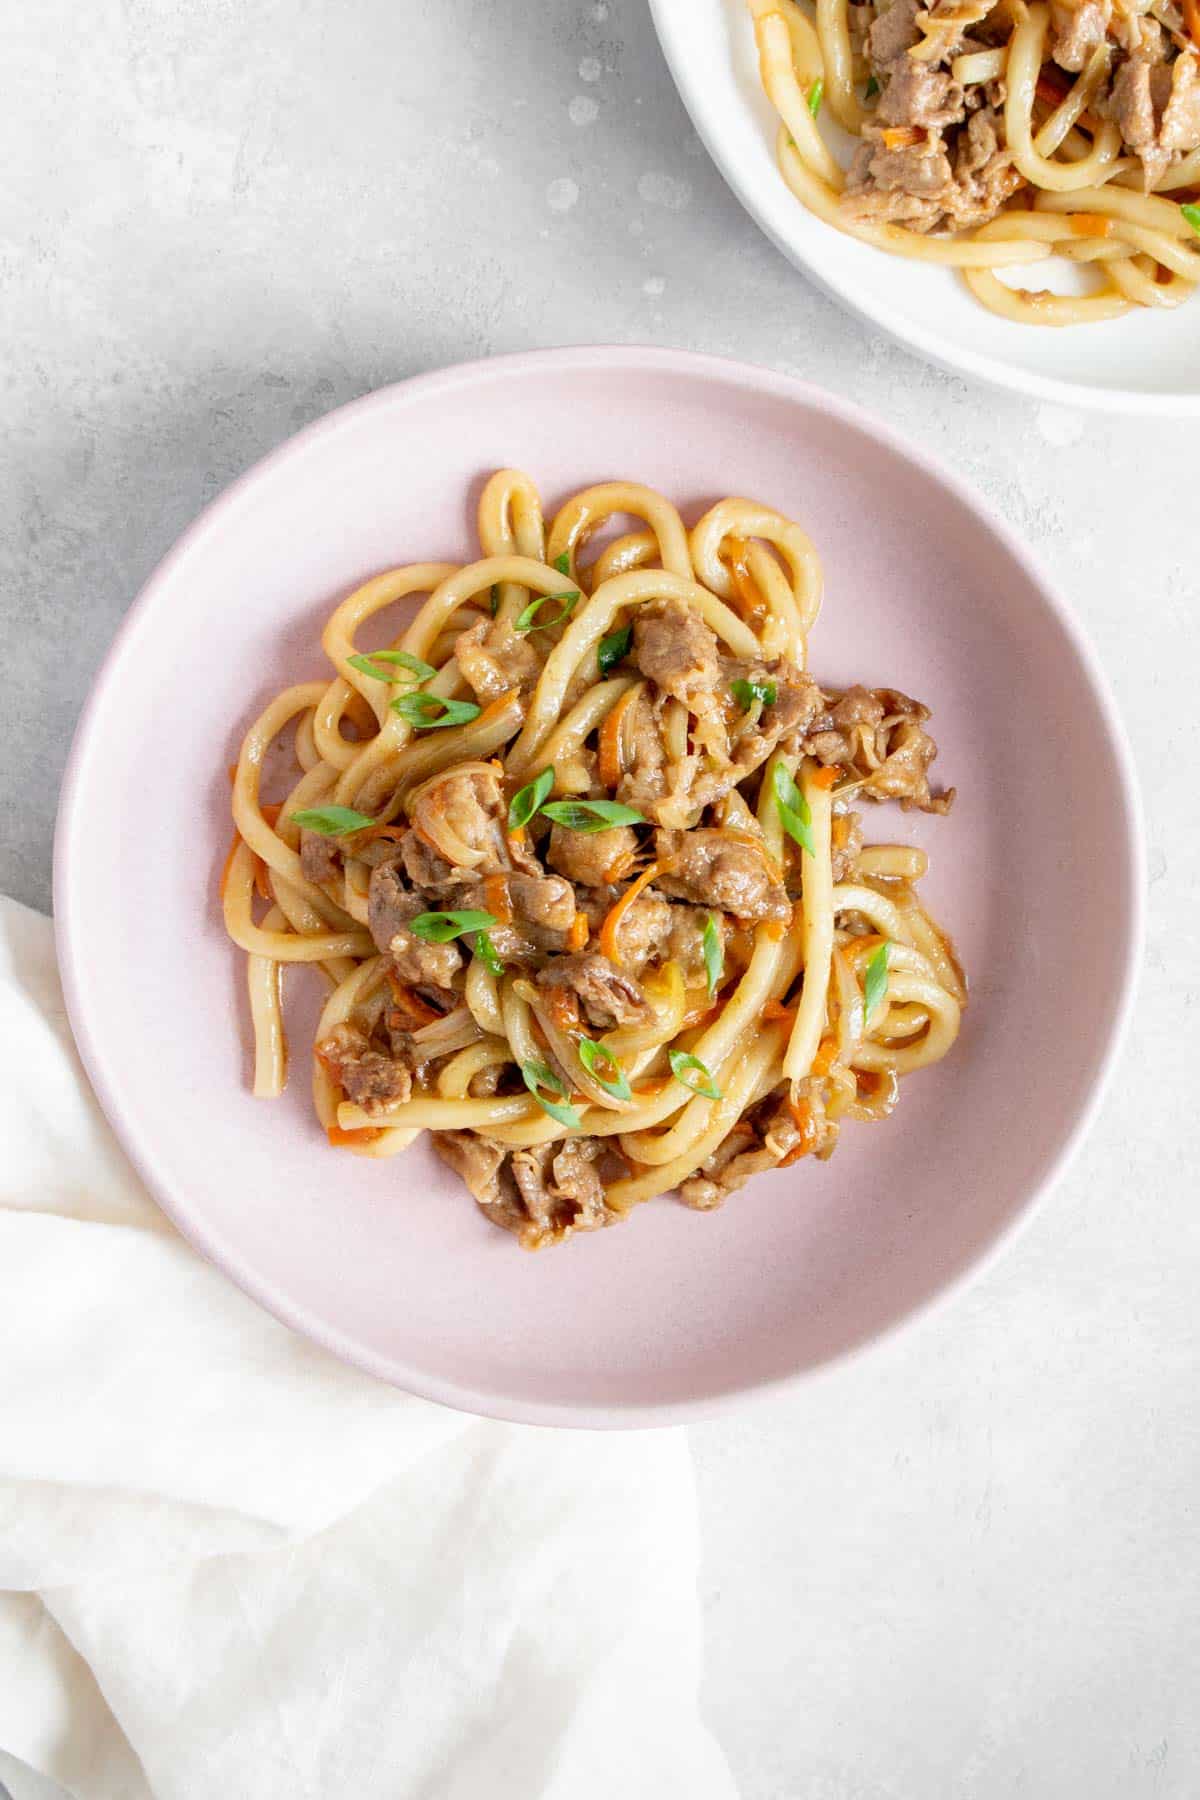 A plate of udon noodles with beef.